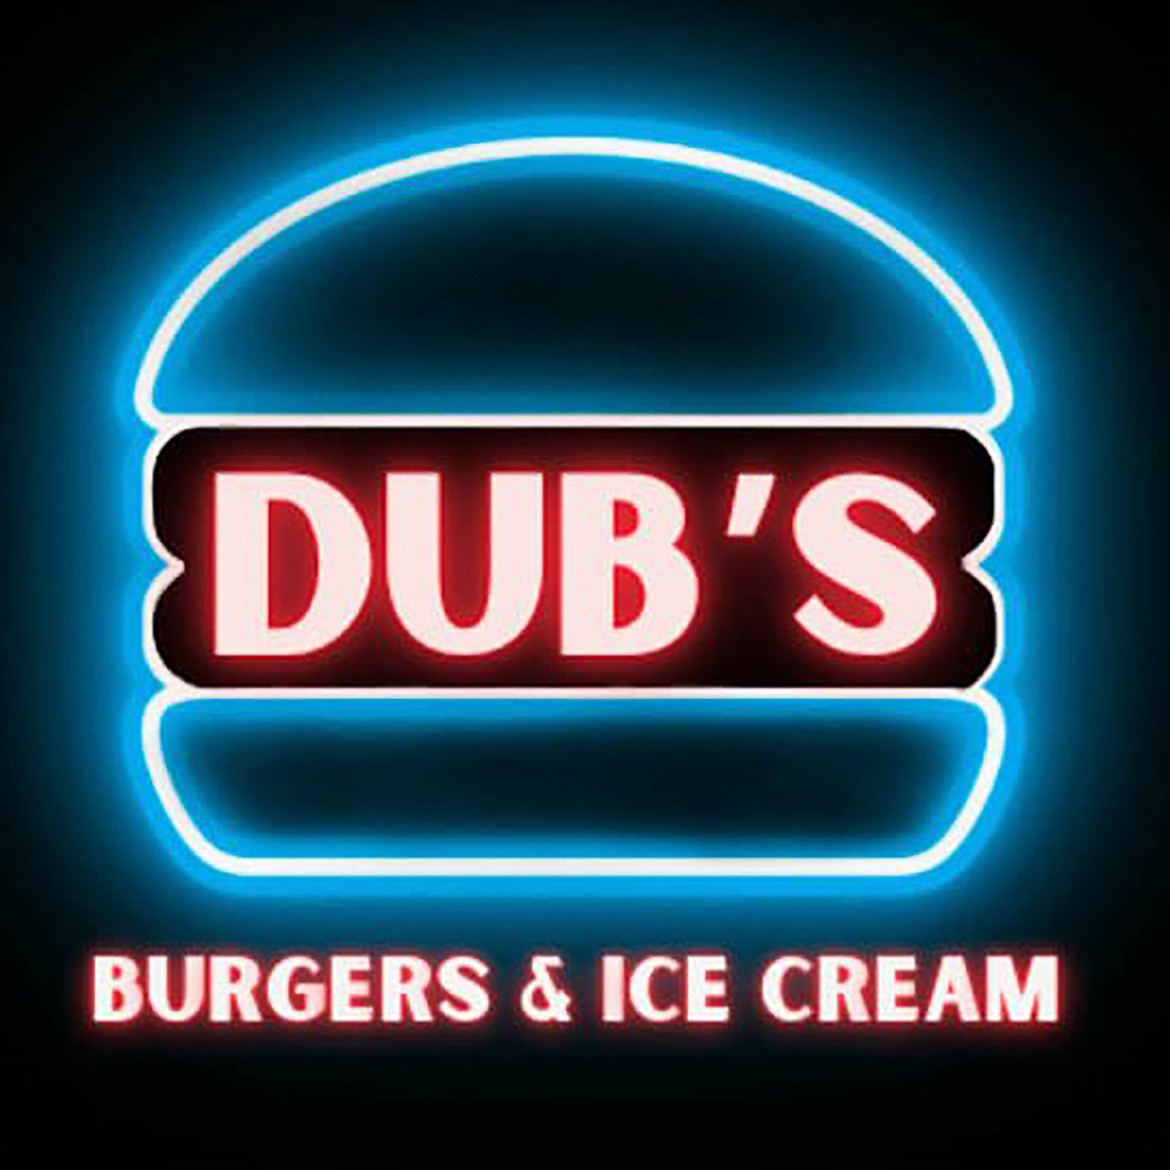 Ryan and Bethany Welsh unveiled Dub's new logo on social media on Monday.